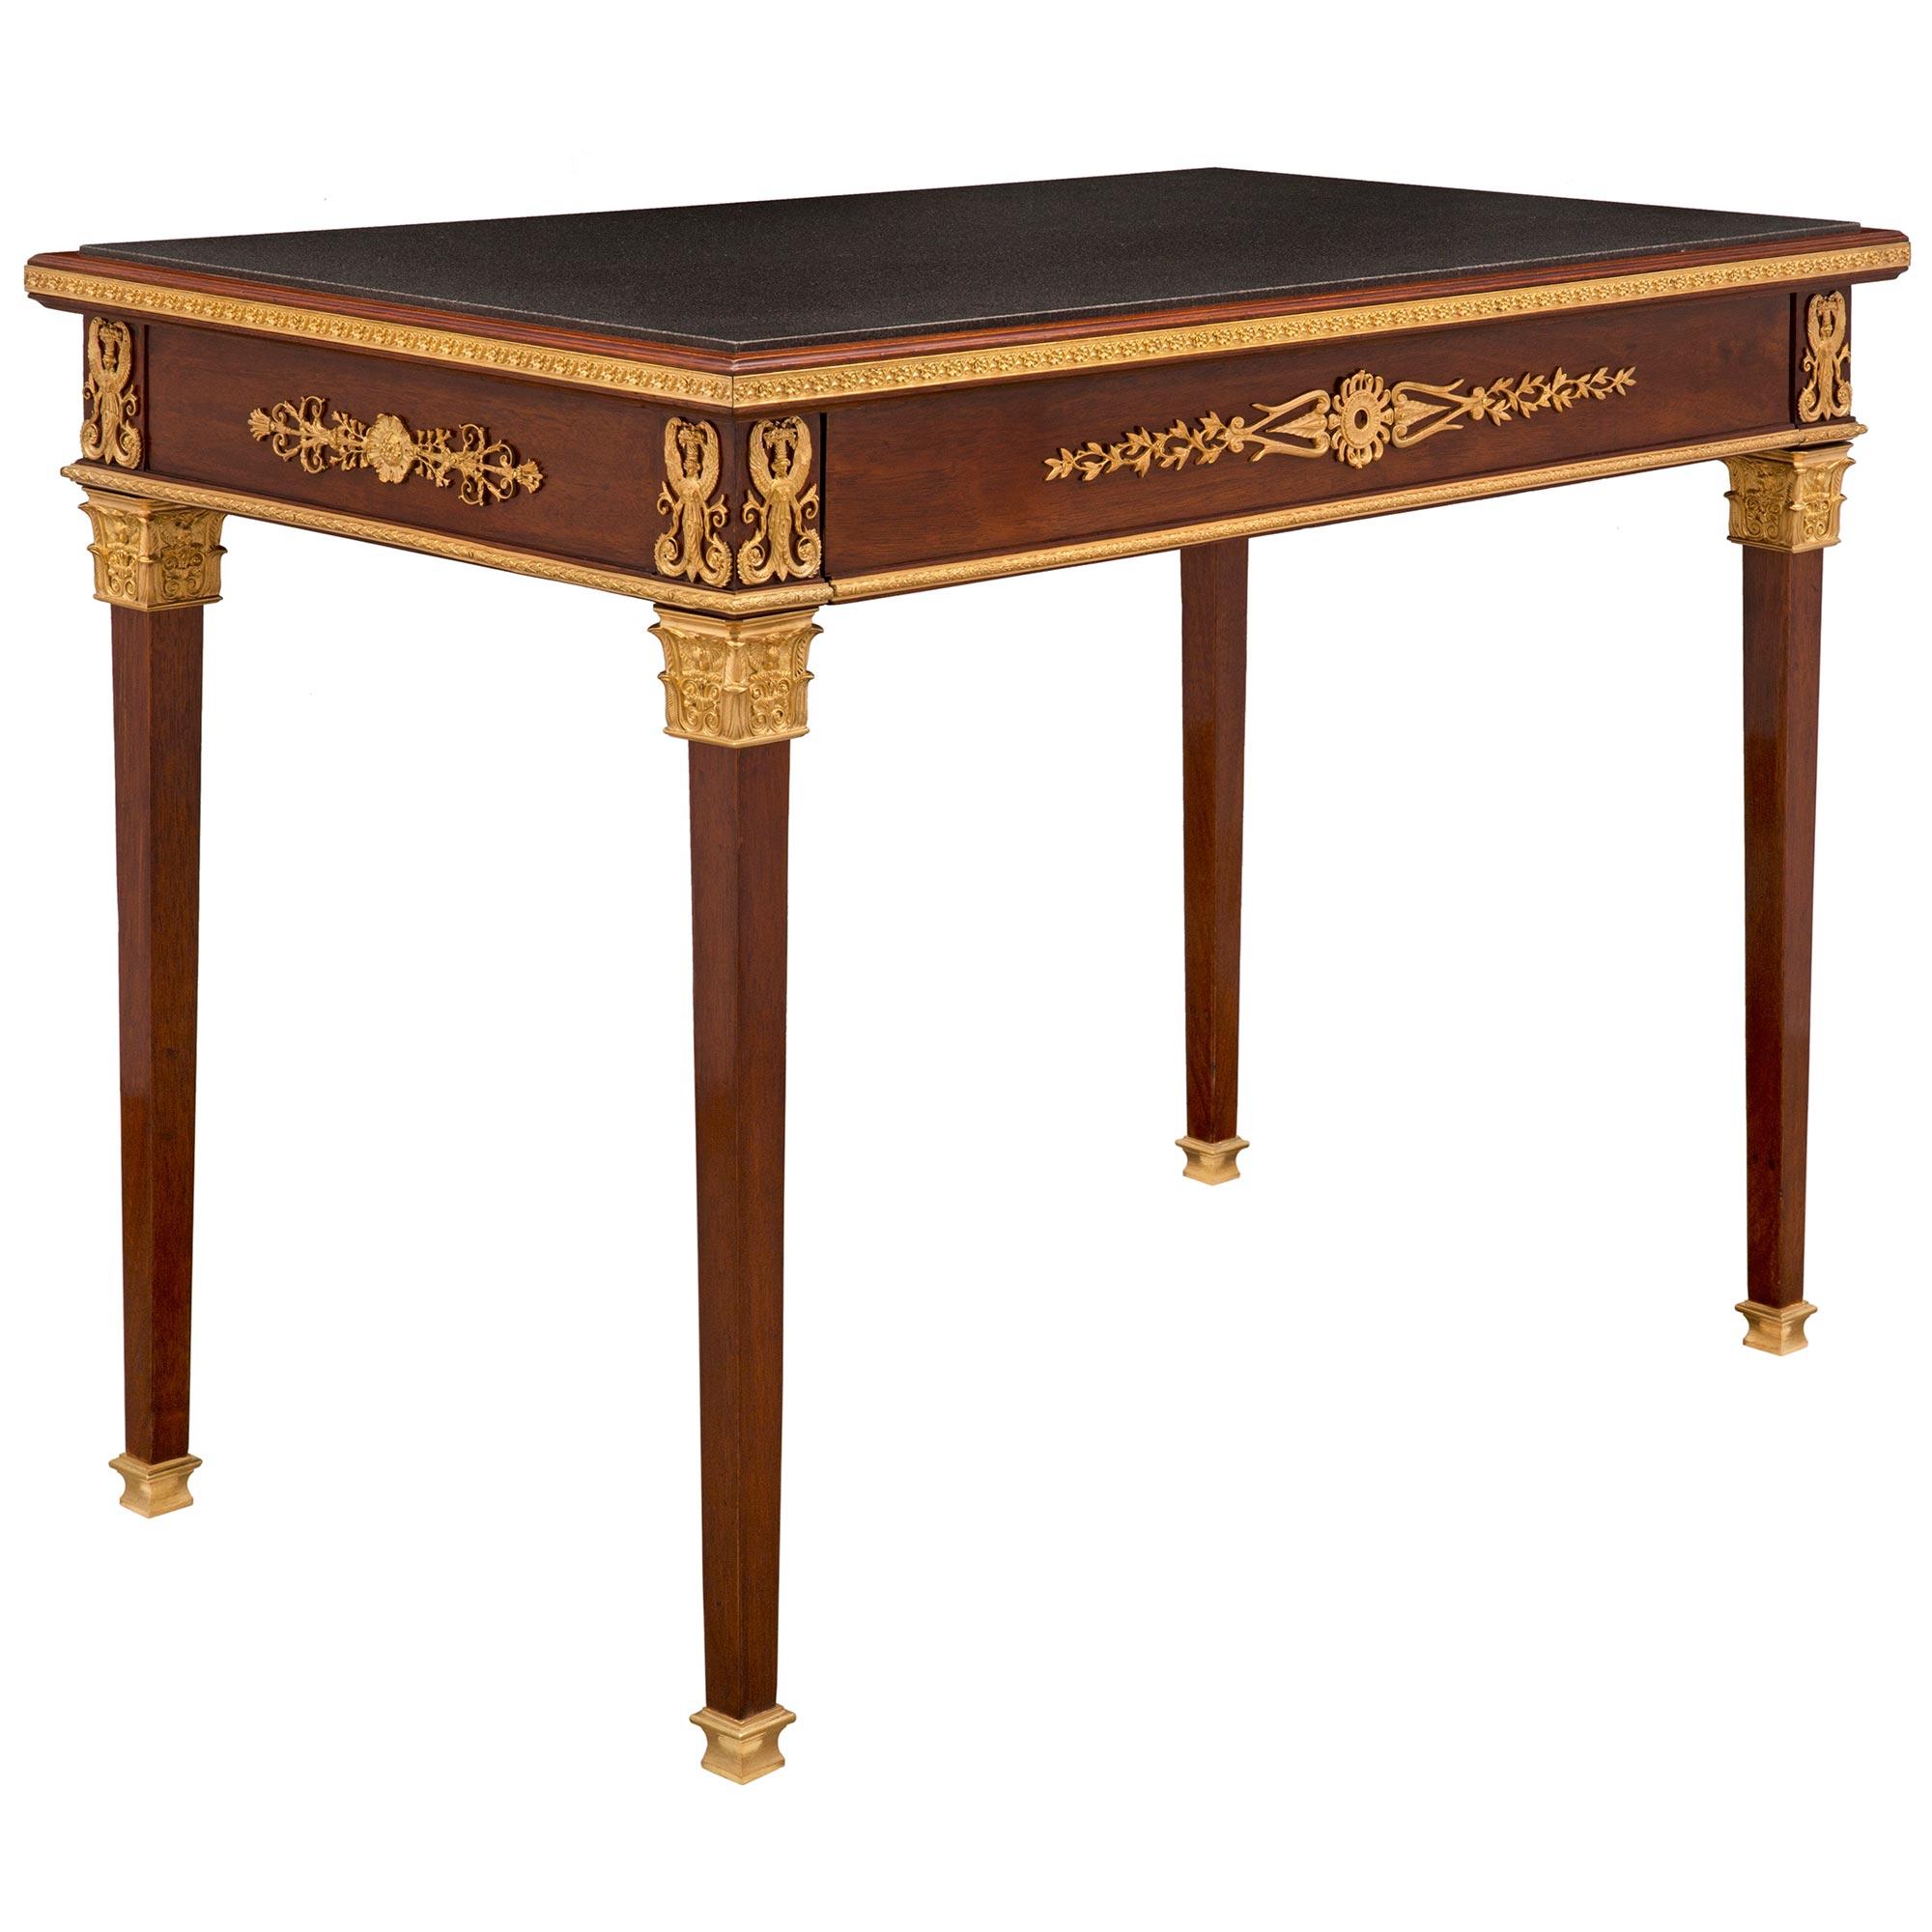 French 19th Century Neoclassical Style Mahogany, Ormolu and Slate Table/Desk In Good Condition For Sale In West Palm Beach, FL